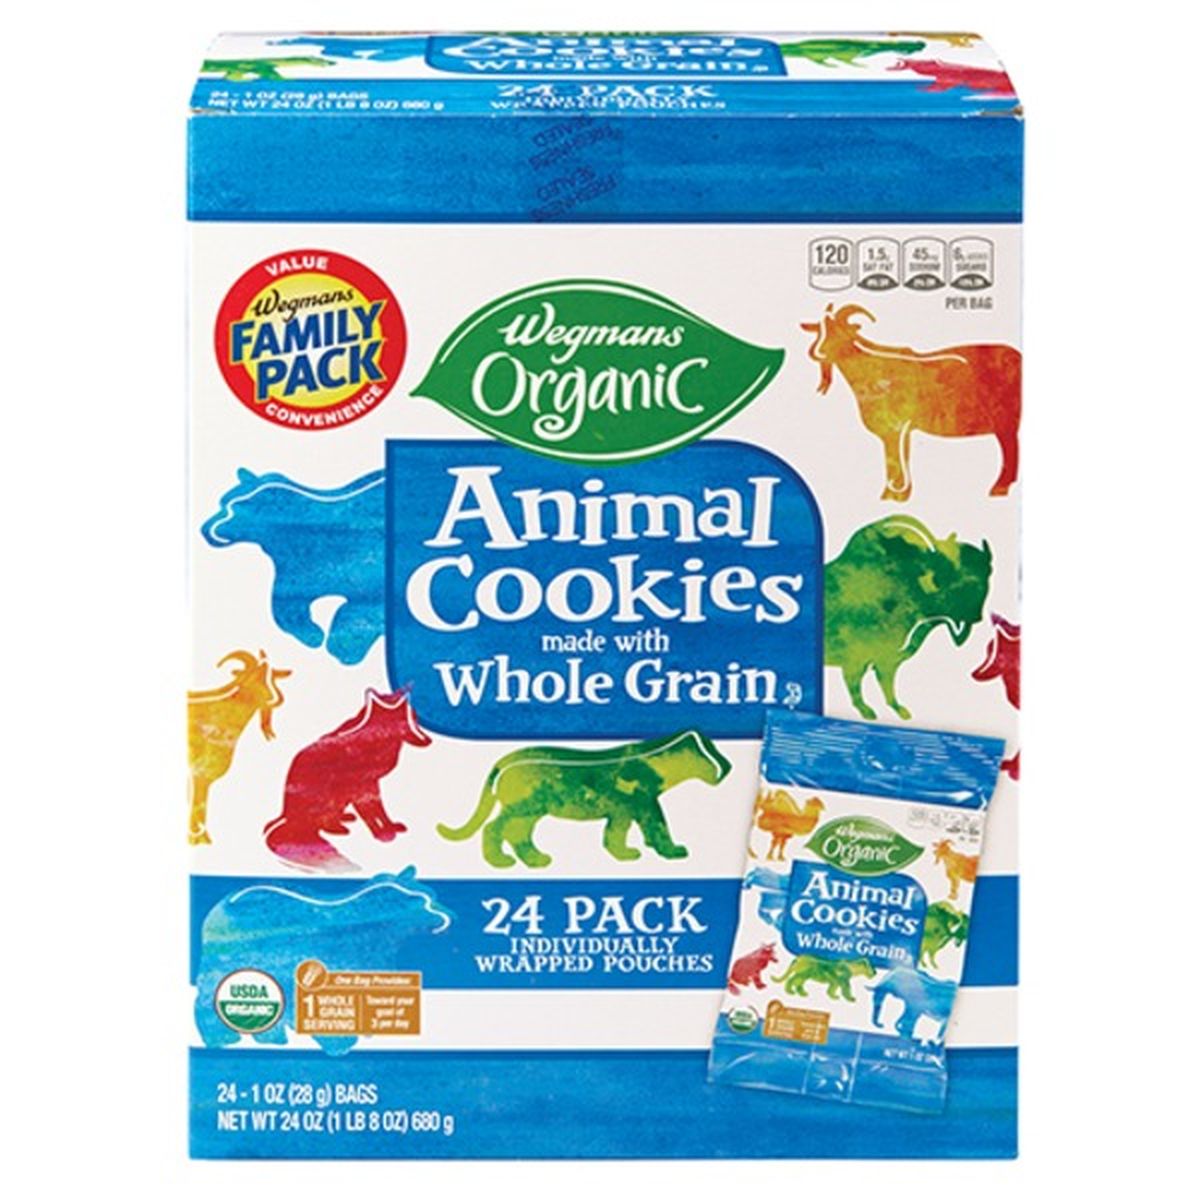 Calories in Wegmans Organic Animal Cookies made with Whole Grain, FAMILY PACK